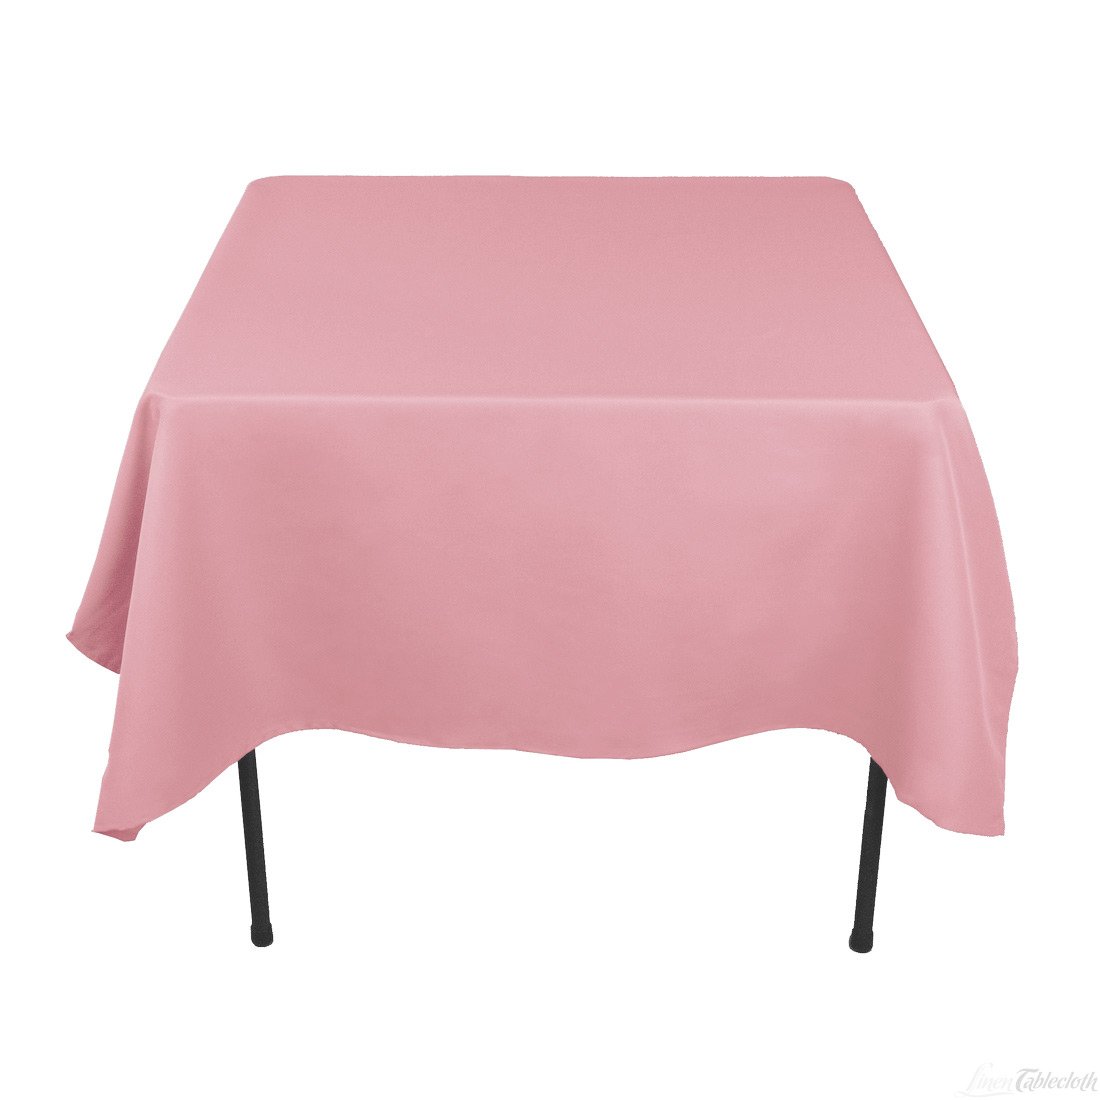 Supplier Polyester Square Tablecloth - 52 x 52 Inch - Burgundy Square Table Cloth for Square or Round Tables in Washable Polyester - Great for Buffet Table, Parties, Holiday Dinner, Wedding & More